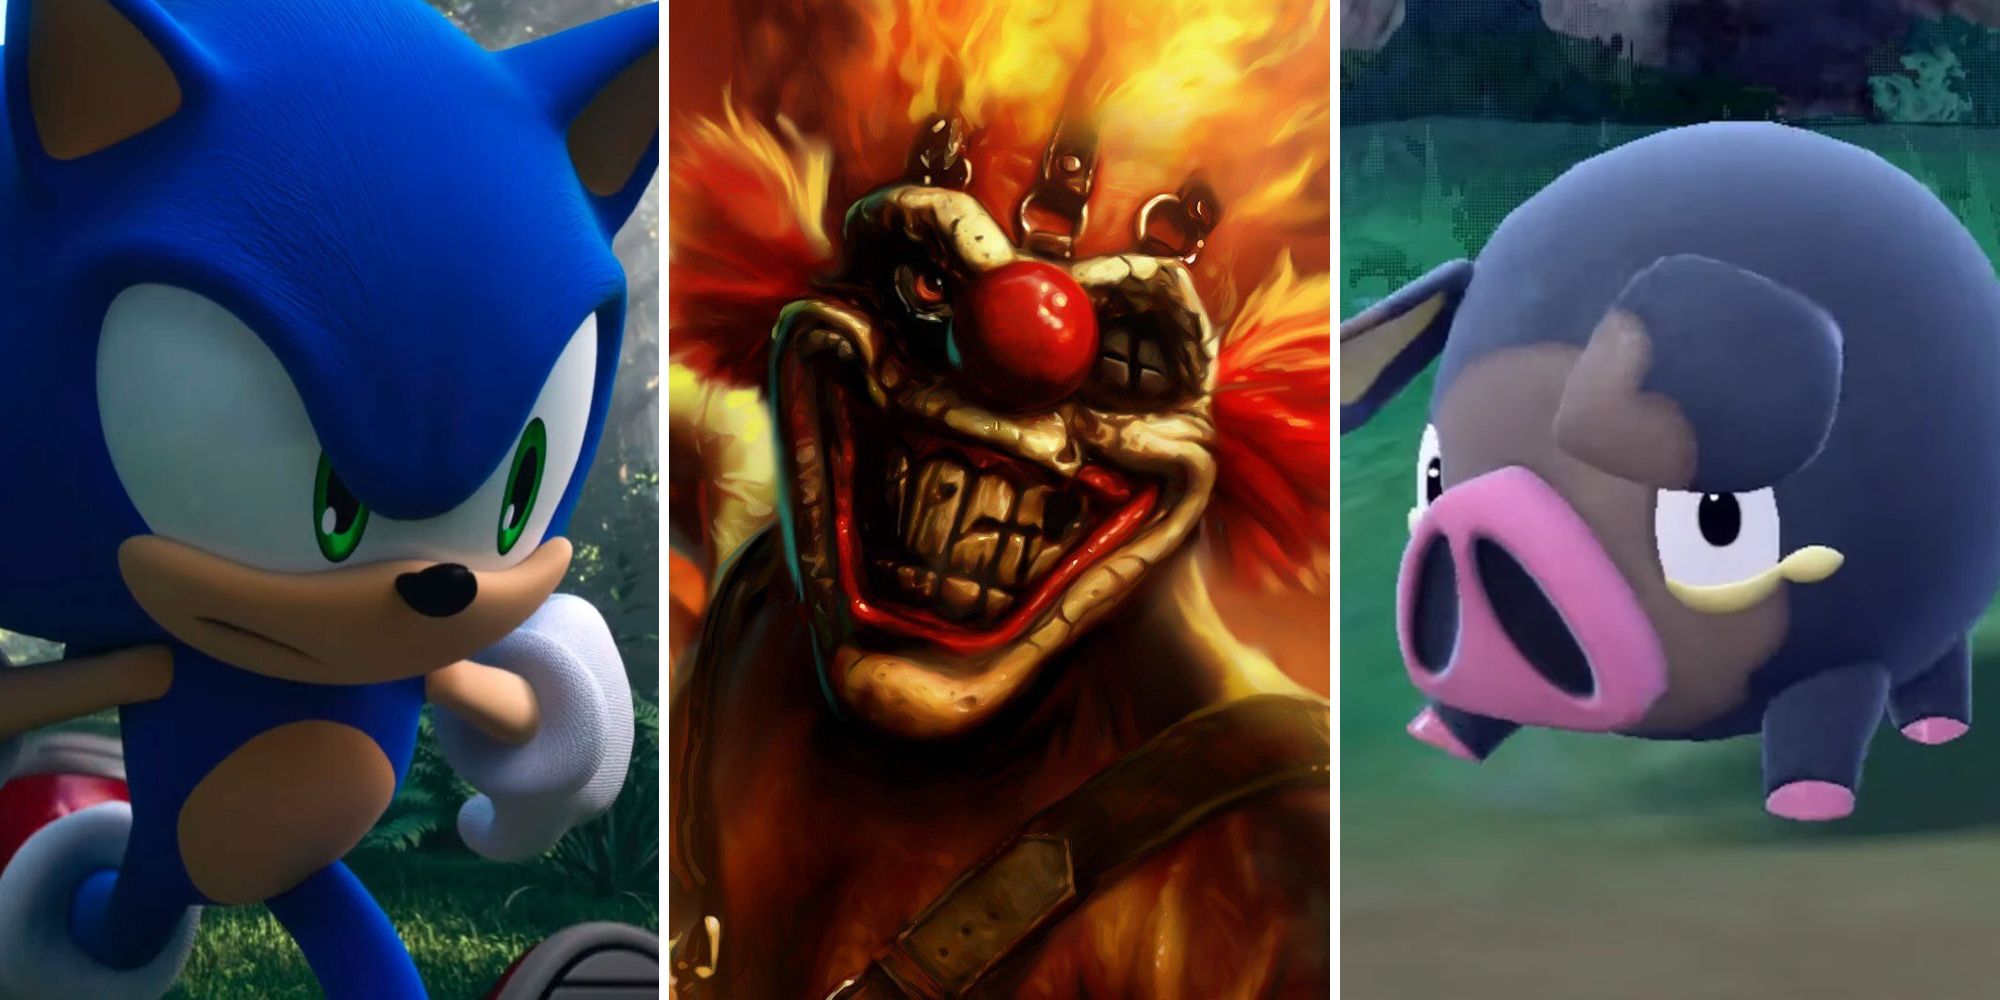 Sonic, Sweet Tooth from Twisted Metal, and Lechonk from Pokemon Scarlet and Violet